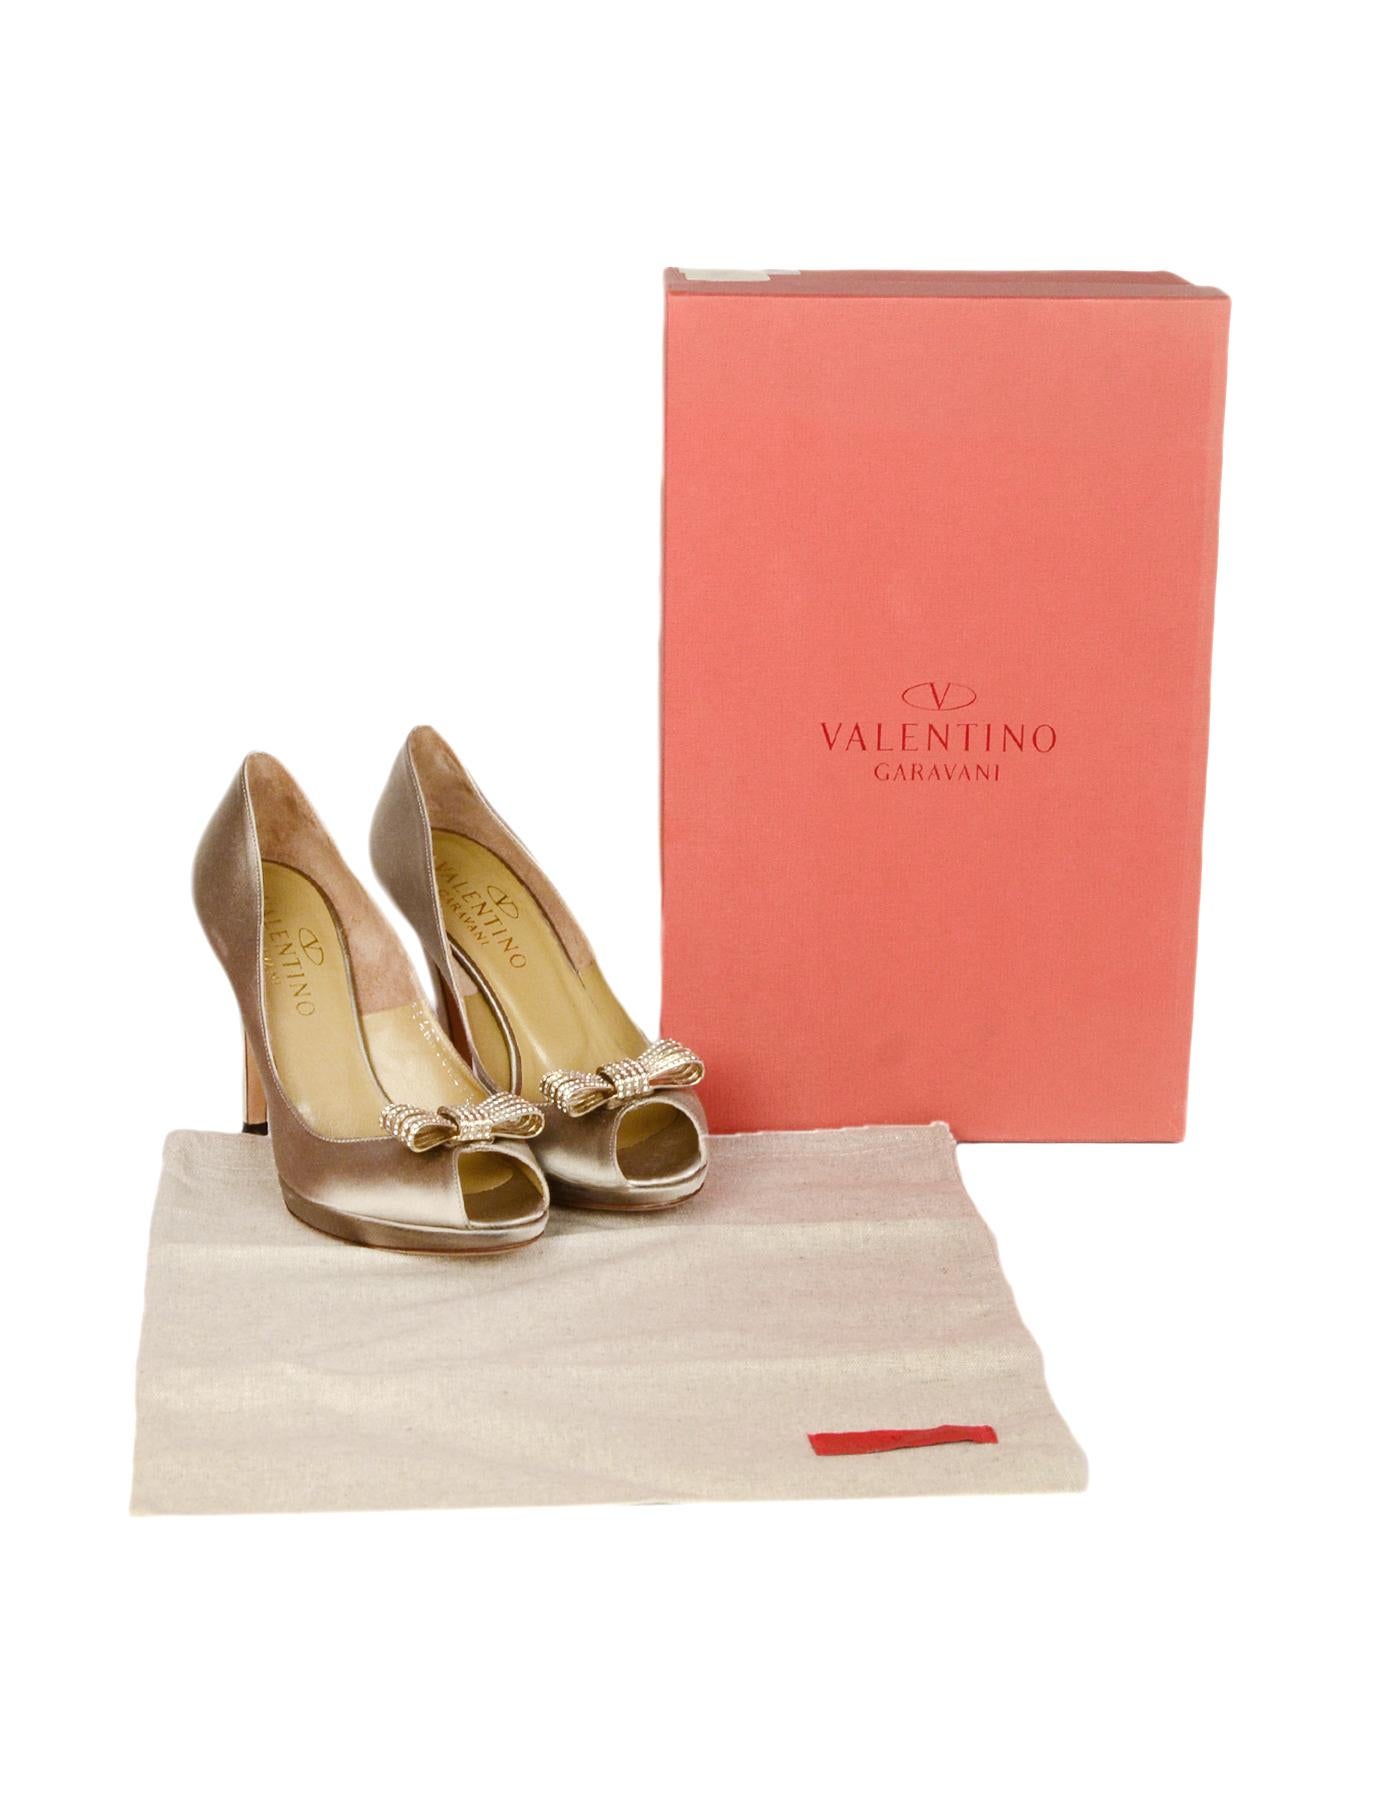 Valentino Sand Satin Peep Toe Pumps W/ Crystal Encrusted Bow Toe Sz 36.5

Made In: Italy
Color: Sand, gold
Hardware: Goldtone
Materials: Satin, metal, crystals
Closure/Opening: Slide on
Overall Condition: Excellent pre-owned condition with excpetion